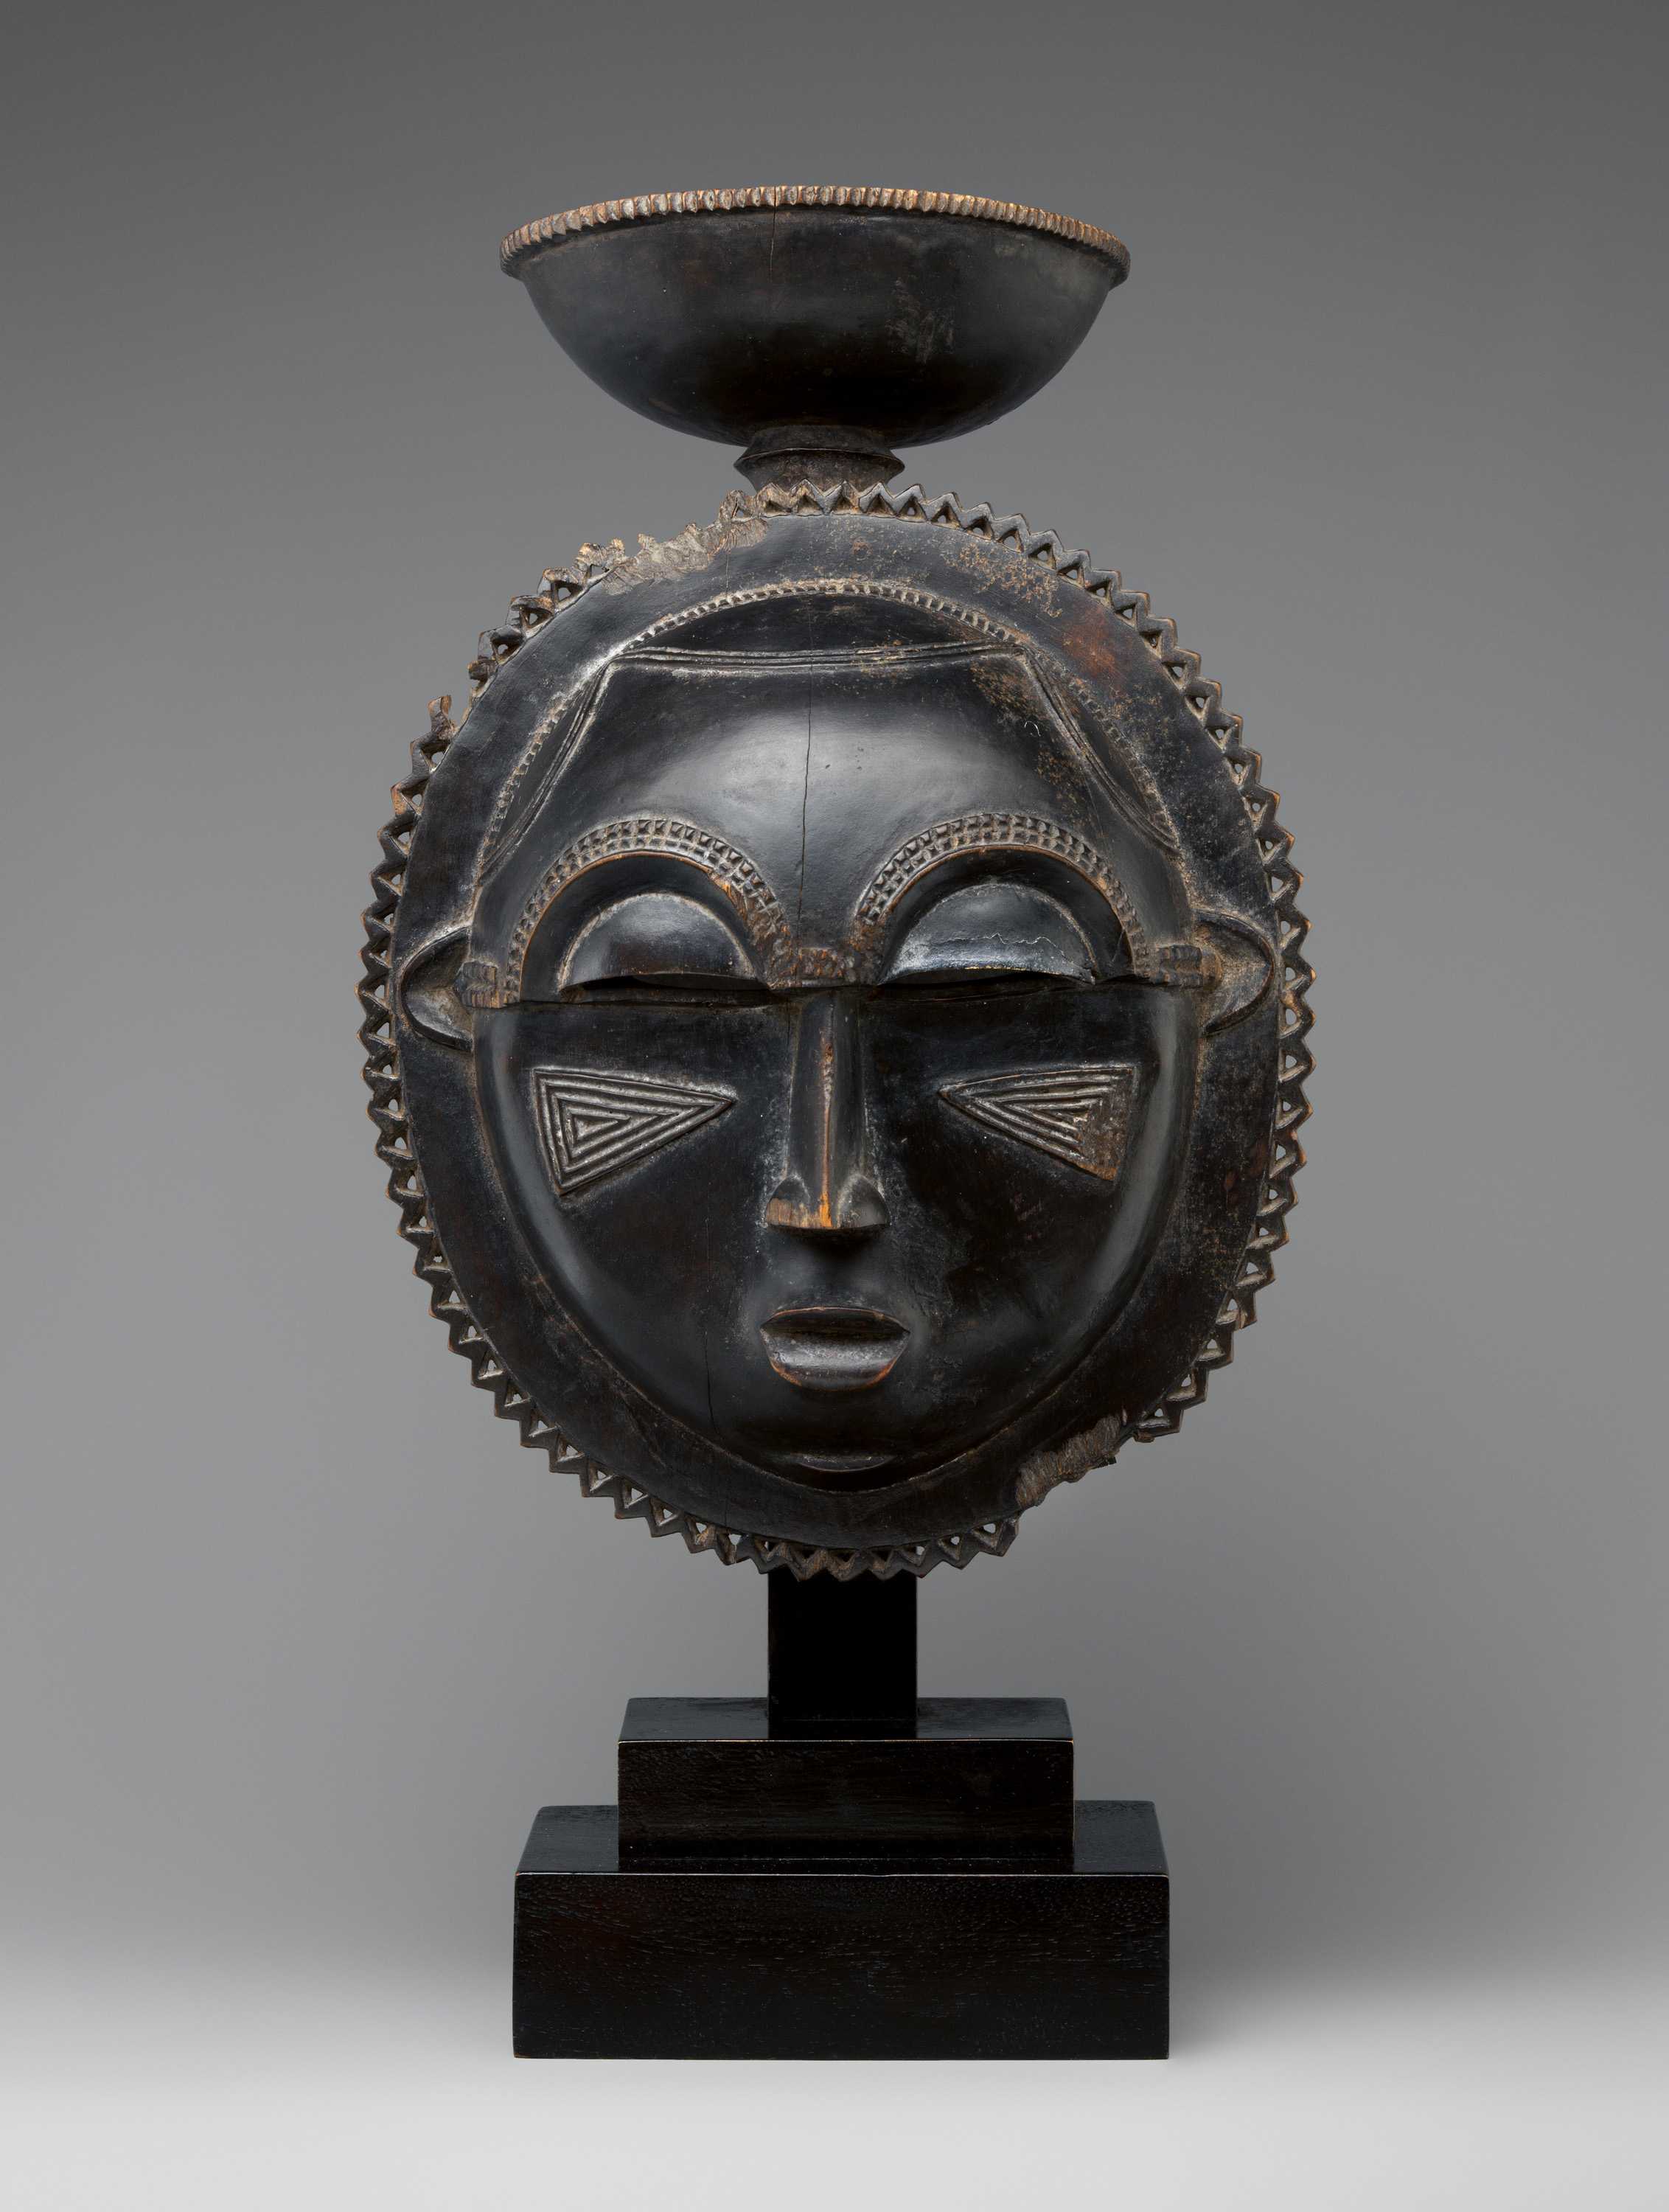 A dark colored moon statue sits on a plain backdrop. The moon has a face and structural design elements.